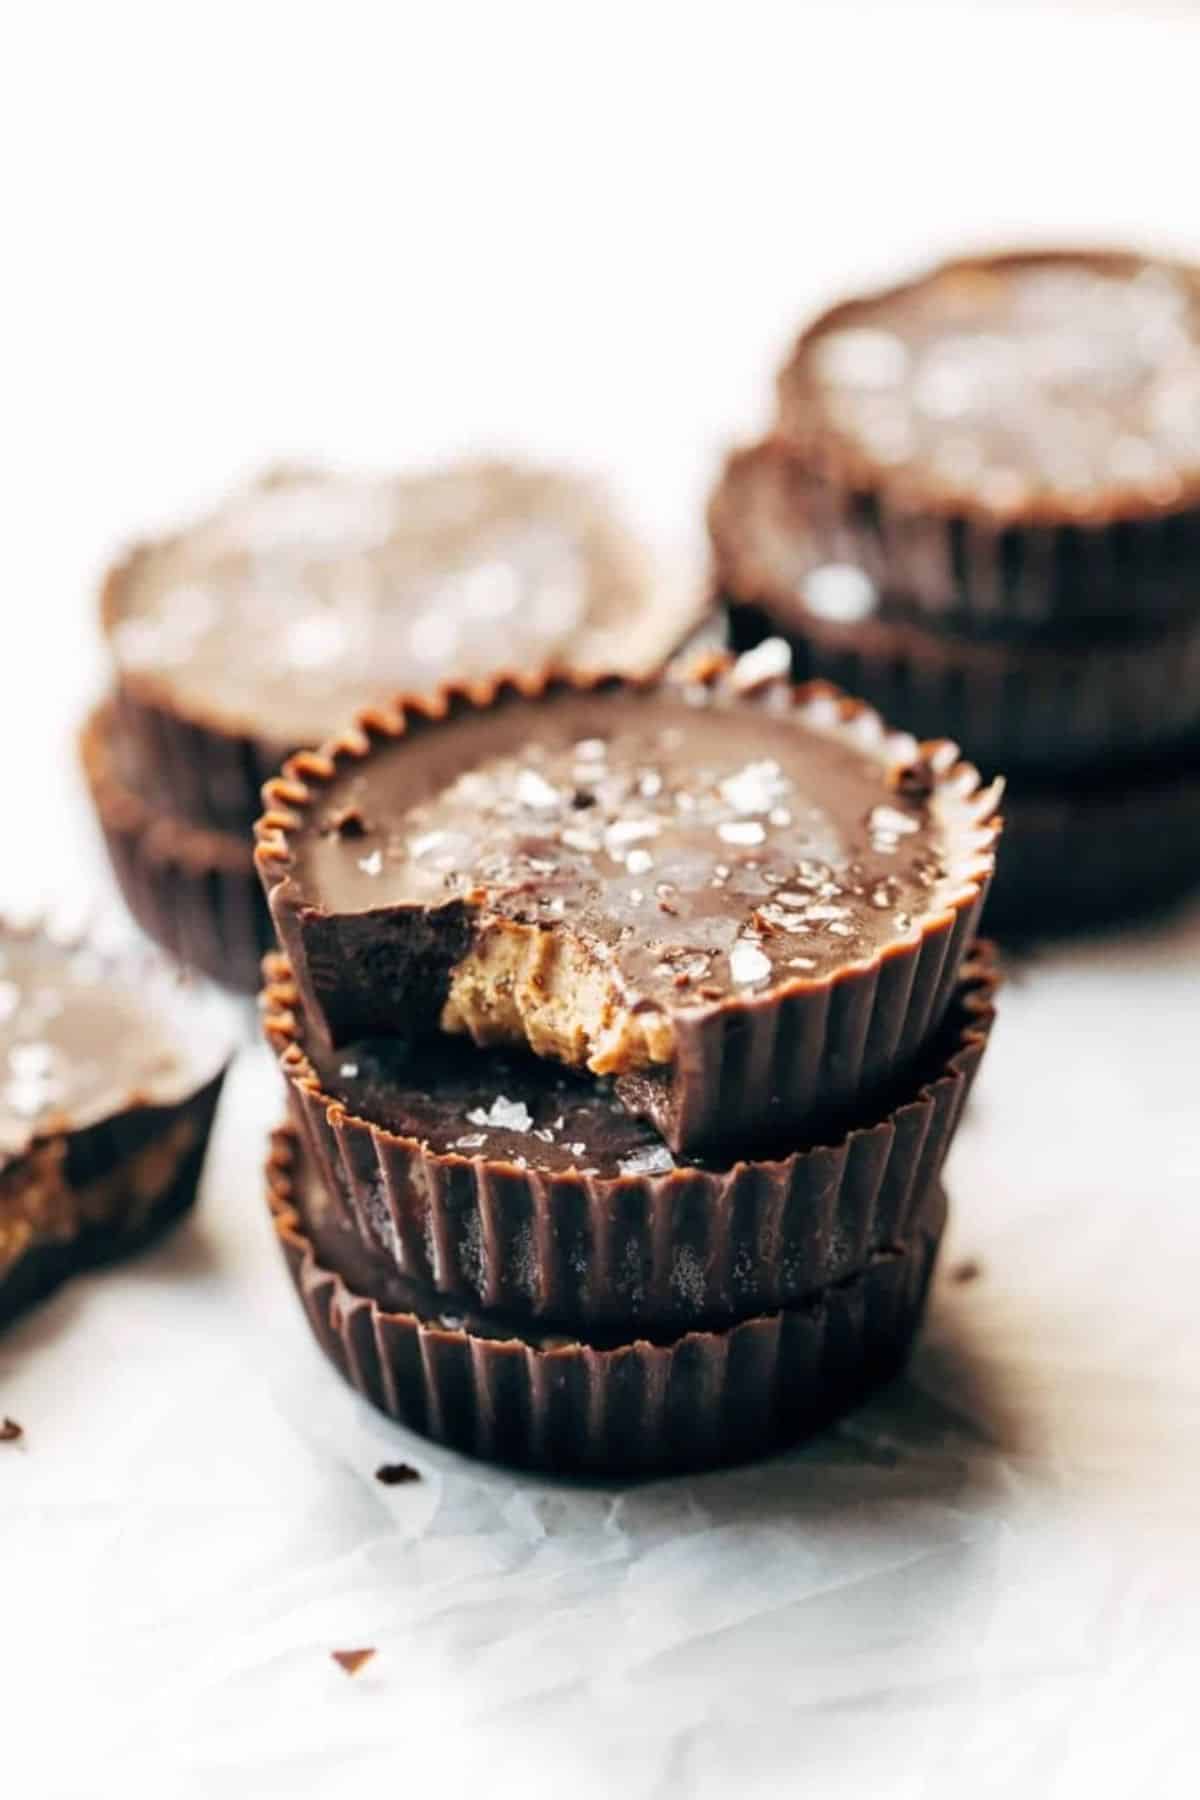 A pile of delicious almond butter cups.